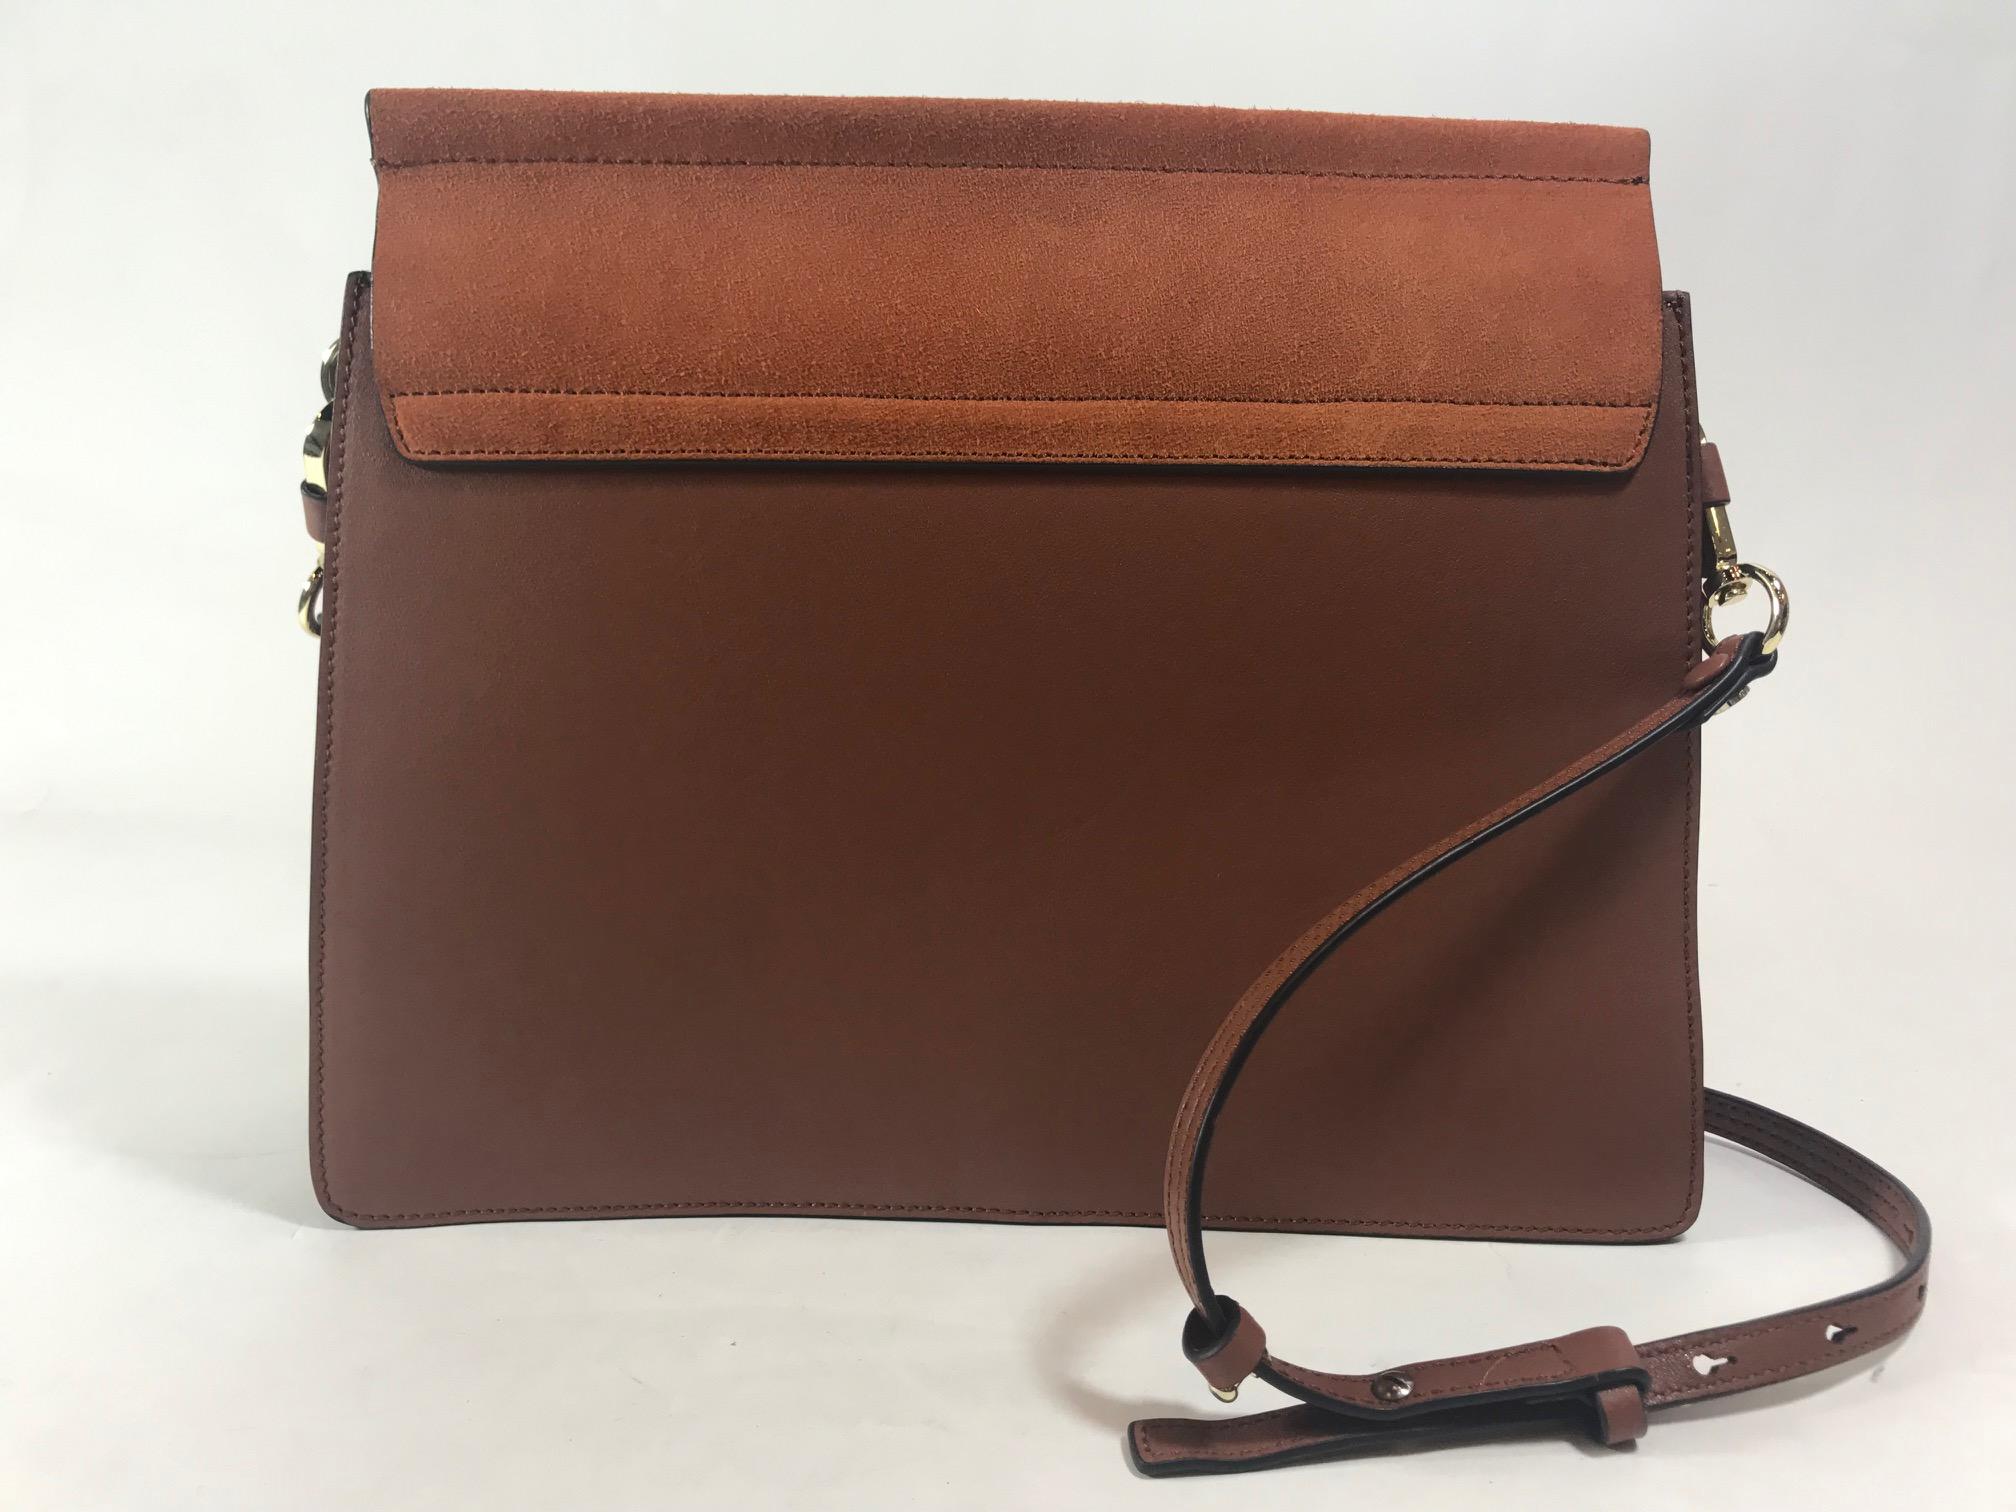 Chloe Medium Faye Bag In Excellent Condition For Sale In Roslyn, NY